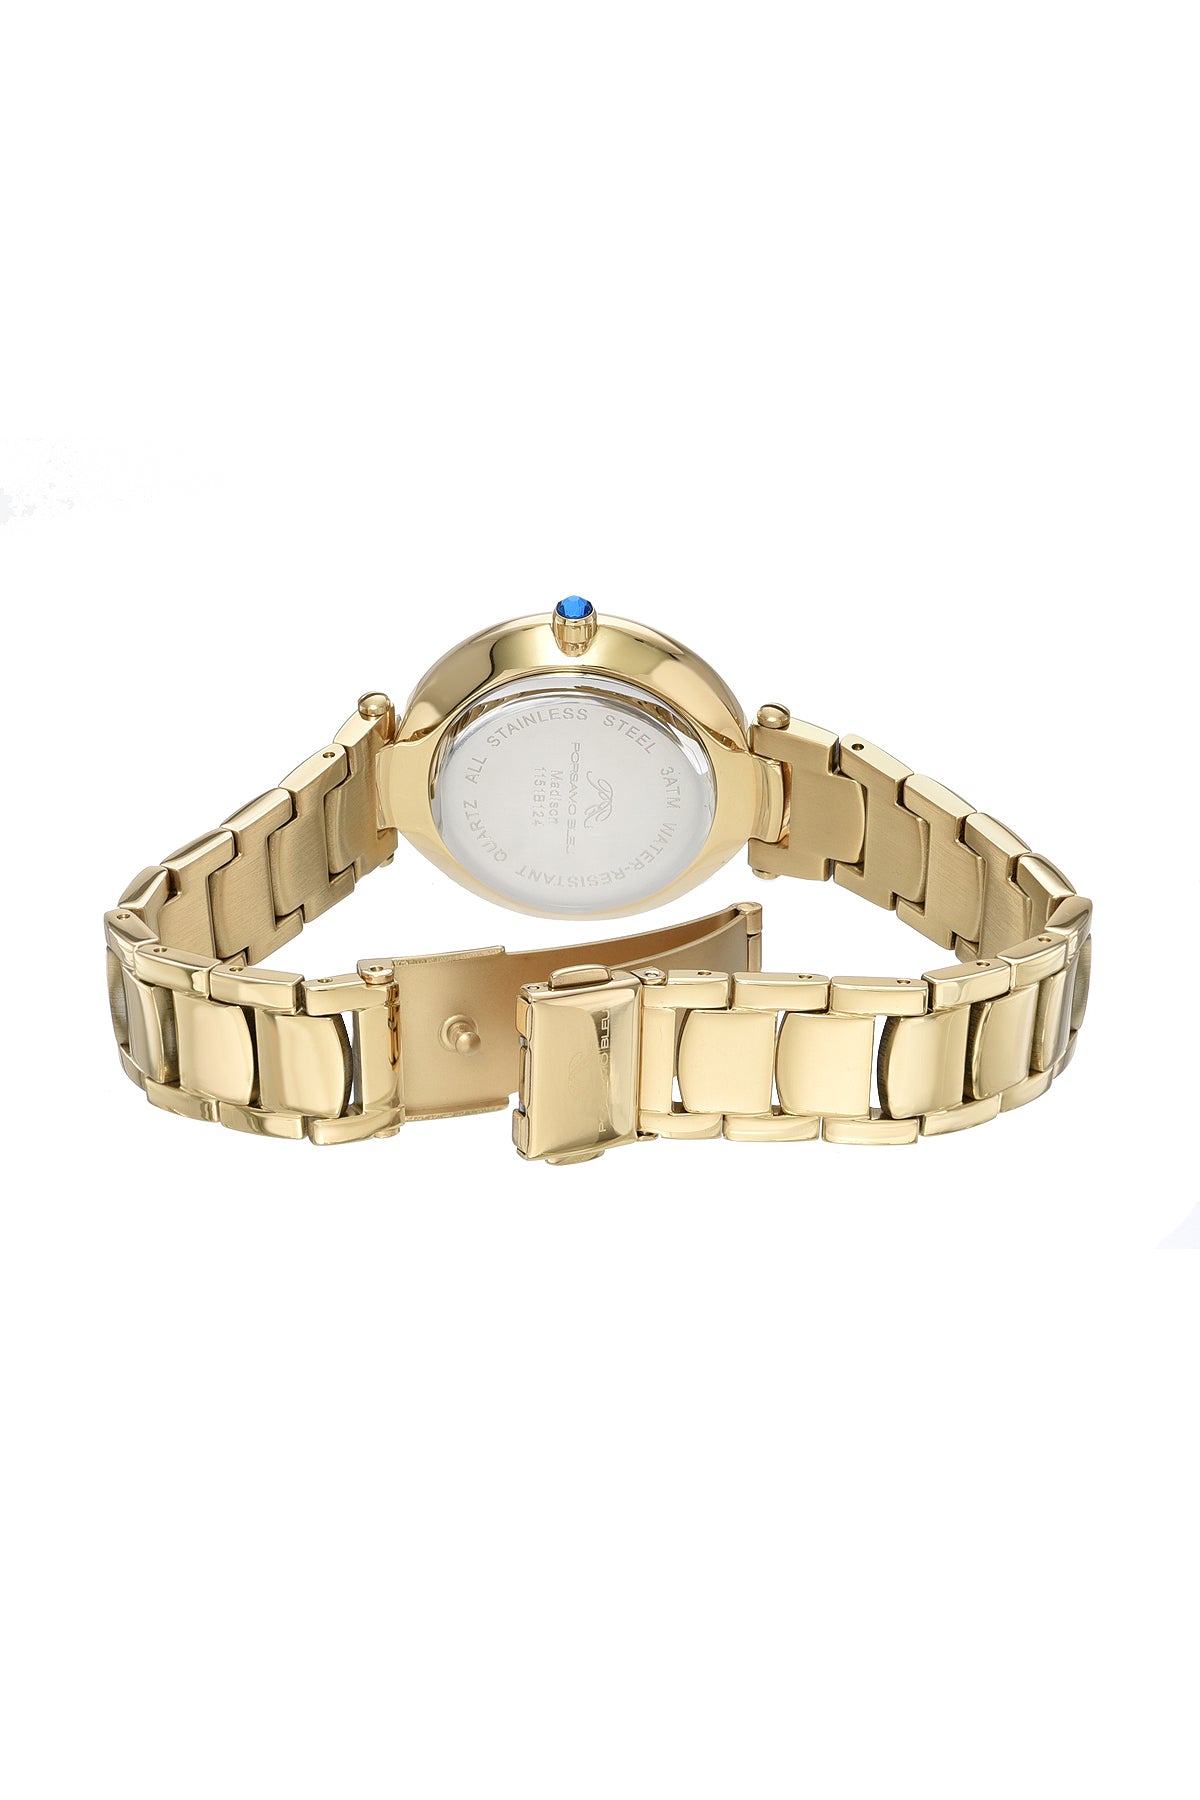 Porsamo Bleu Madison Luxury Women's Stainless Steel Watch, Gold With White Guilloche Dial 1151BMAS